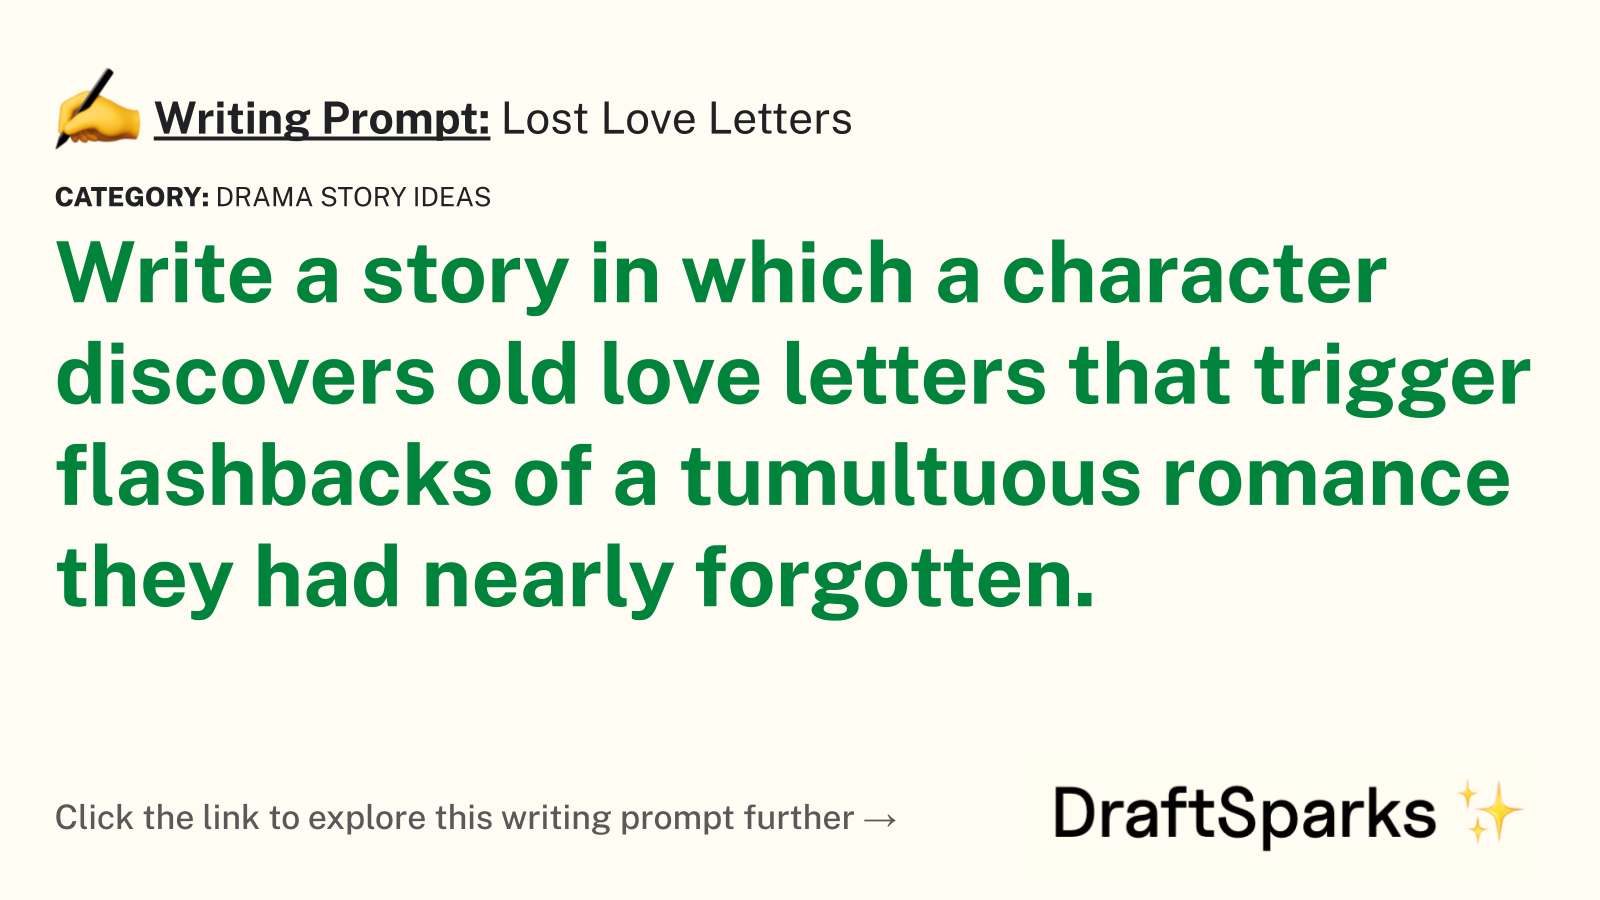 Lost Love Letters